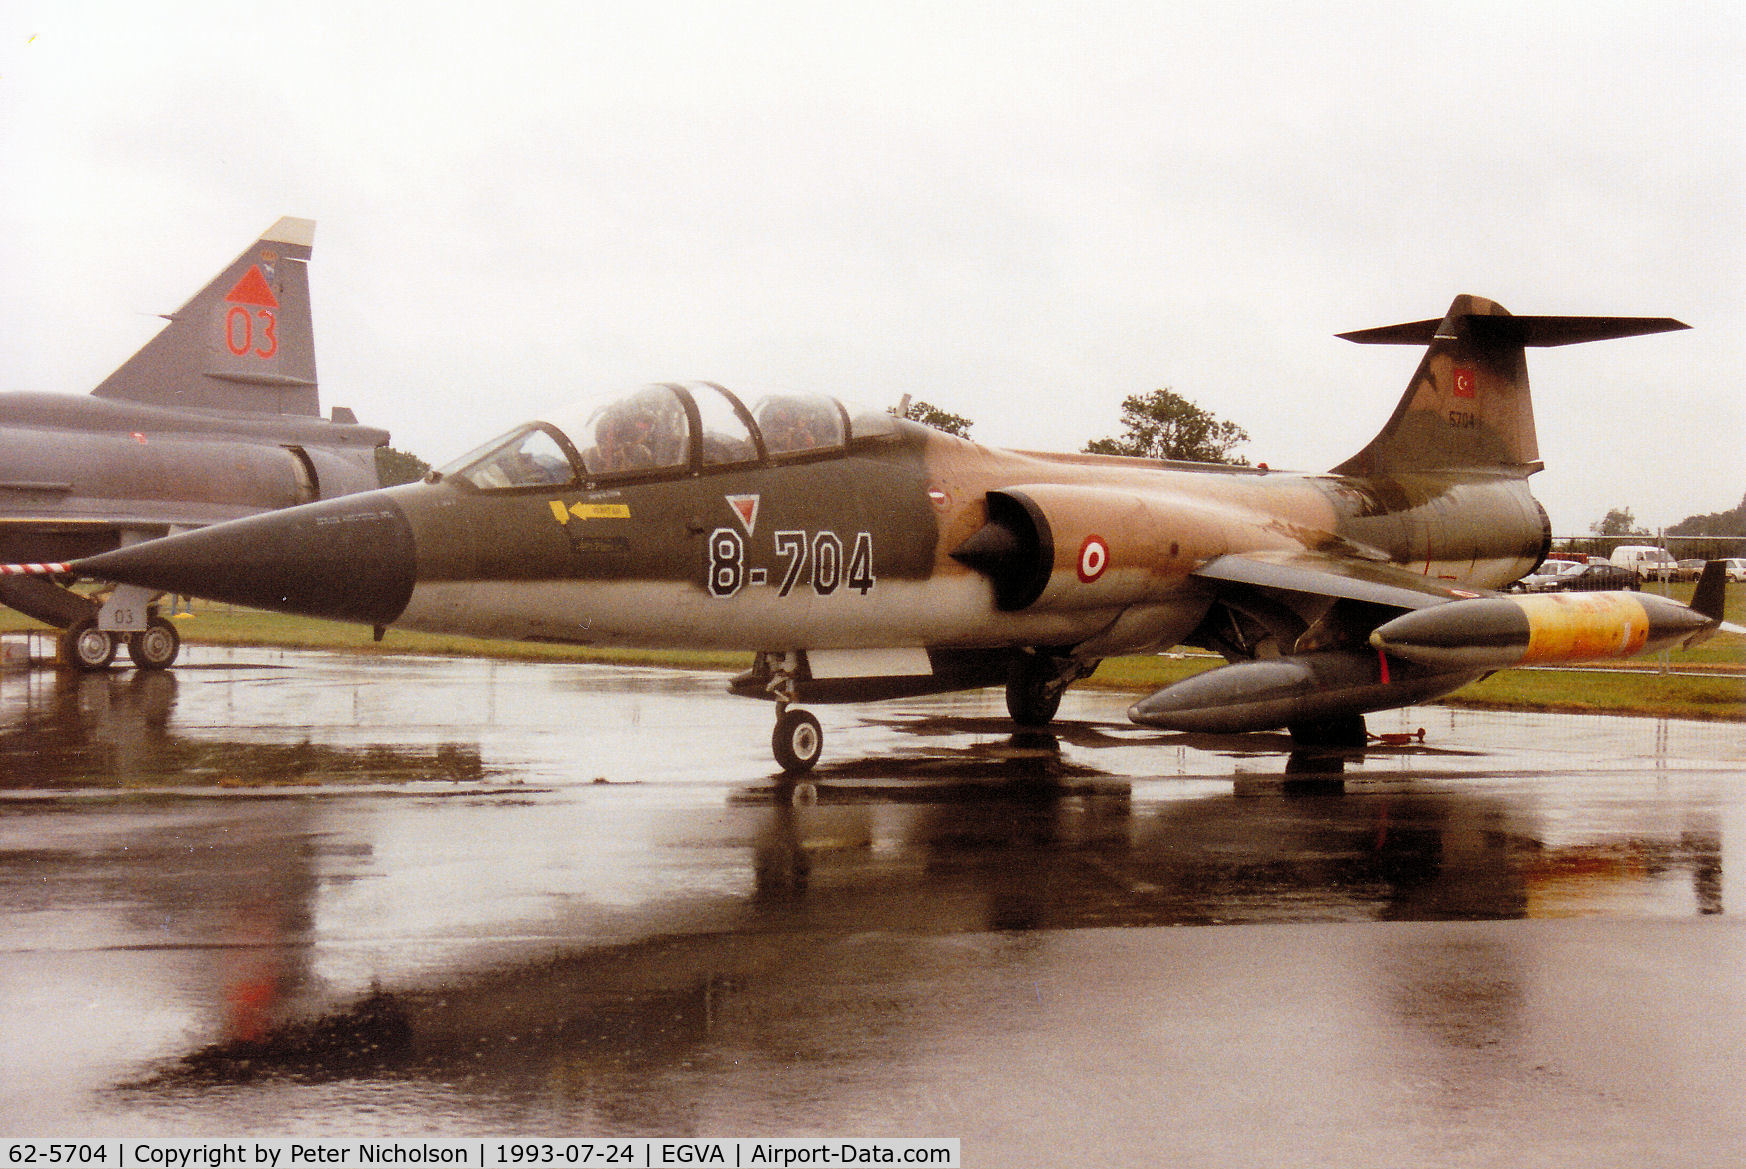 62-5704, 1962 Lockheed TF-104G Starfighter C/N 583D-5704, TF-104G Starfighter as 8-704 of 181 Filo Turkish Air Force on display at the 1993 Intnl Air Tattoo at RAF Fairford.